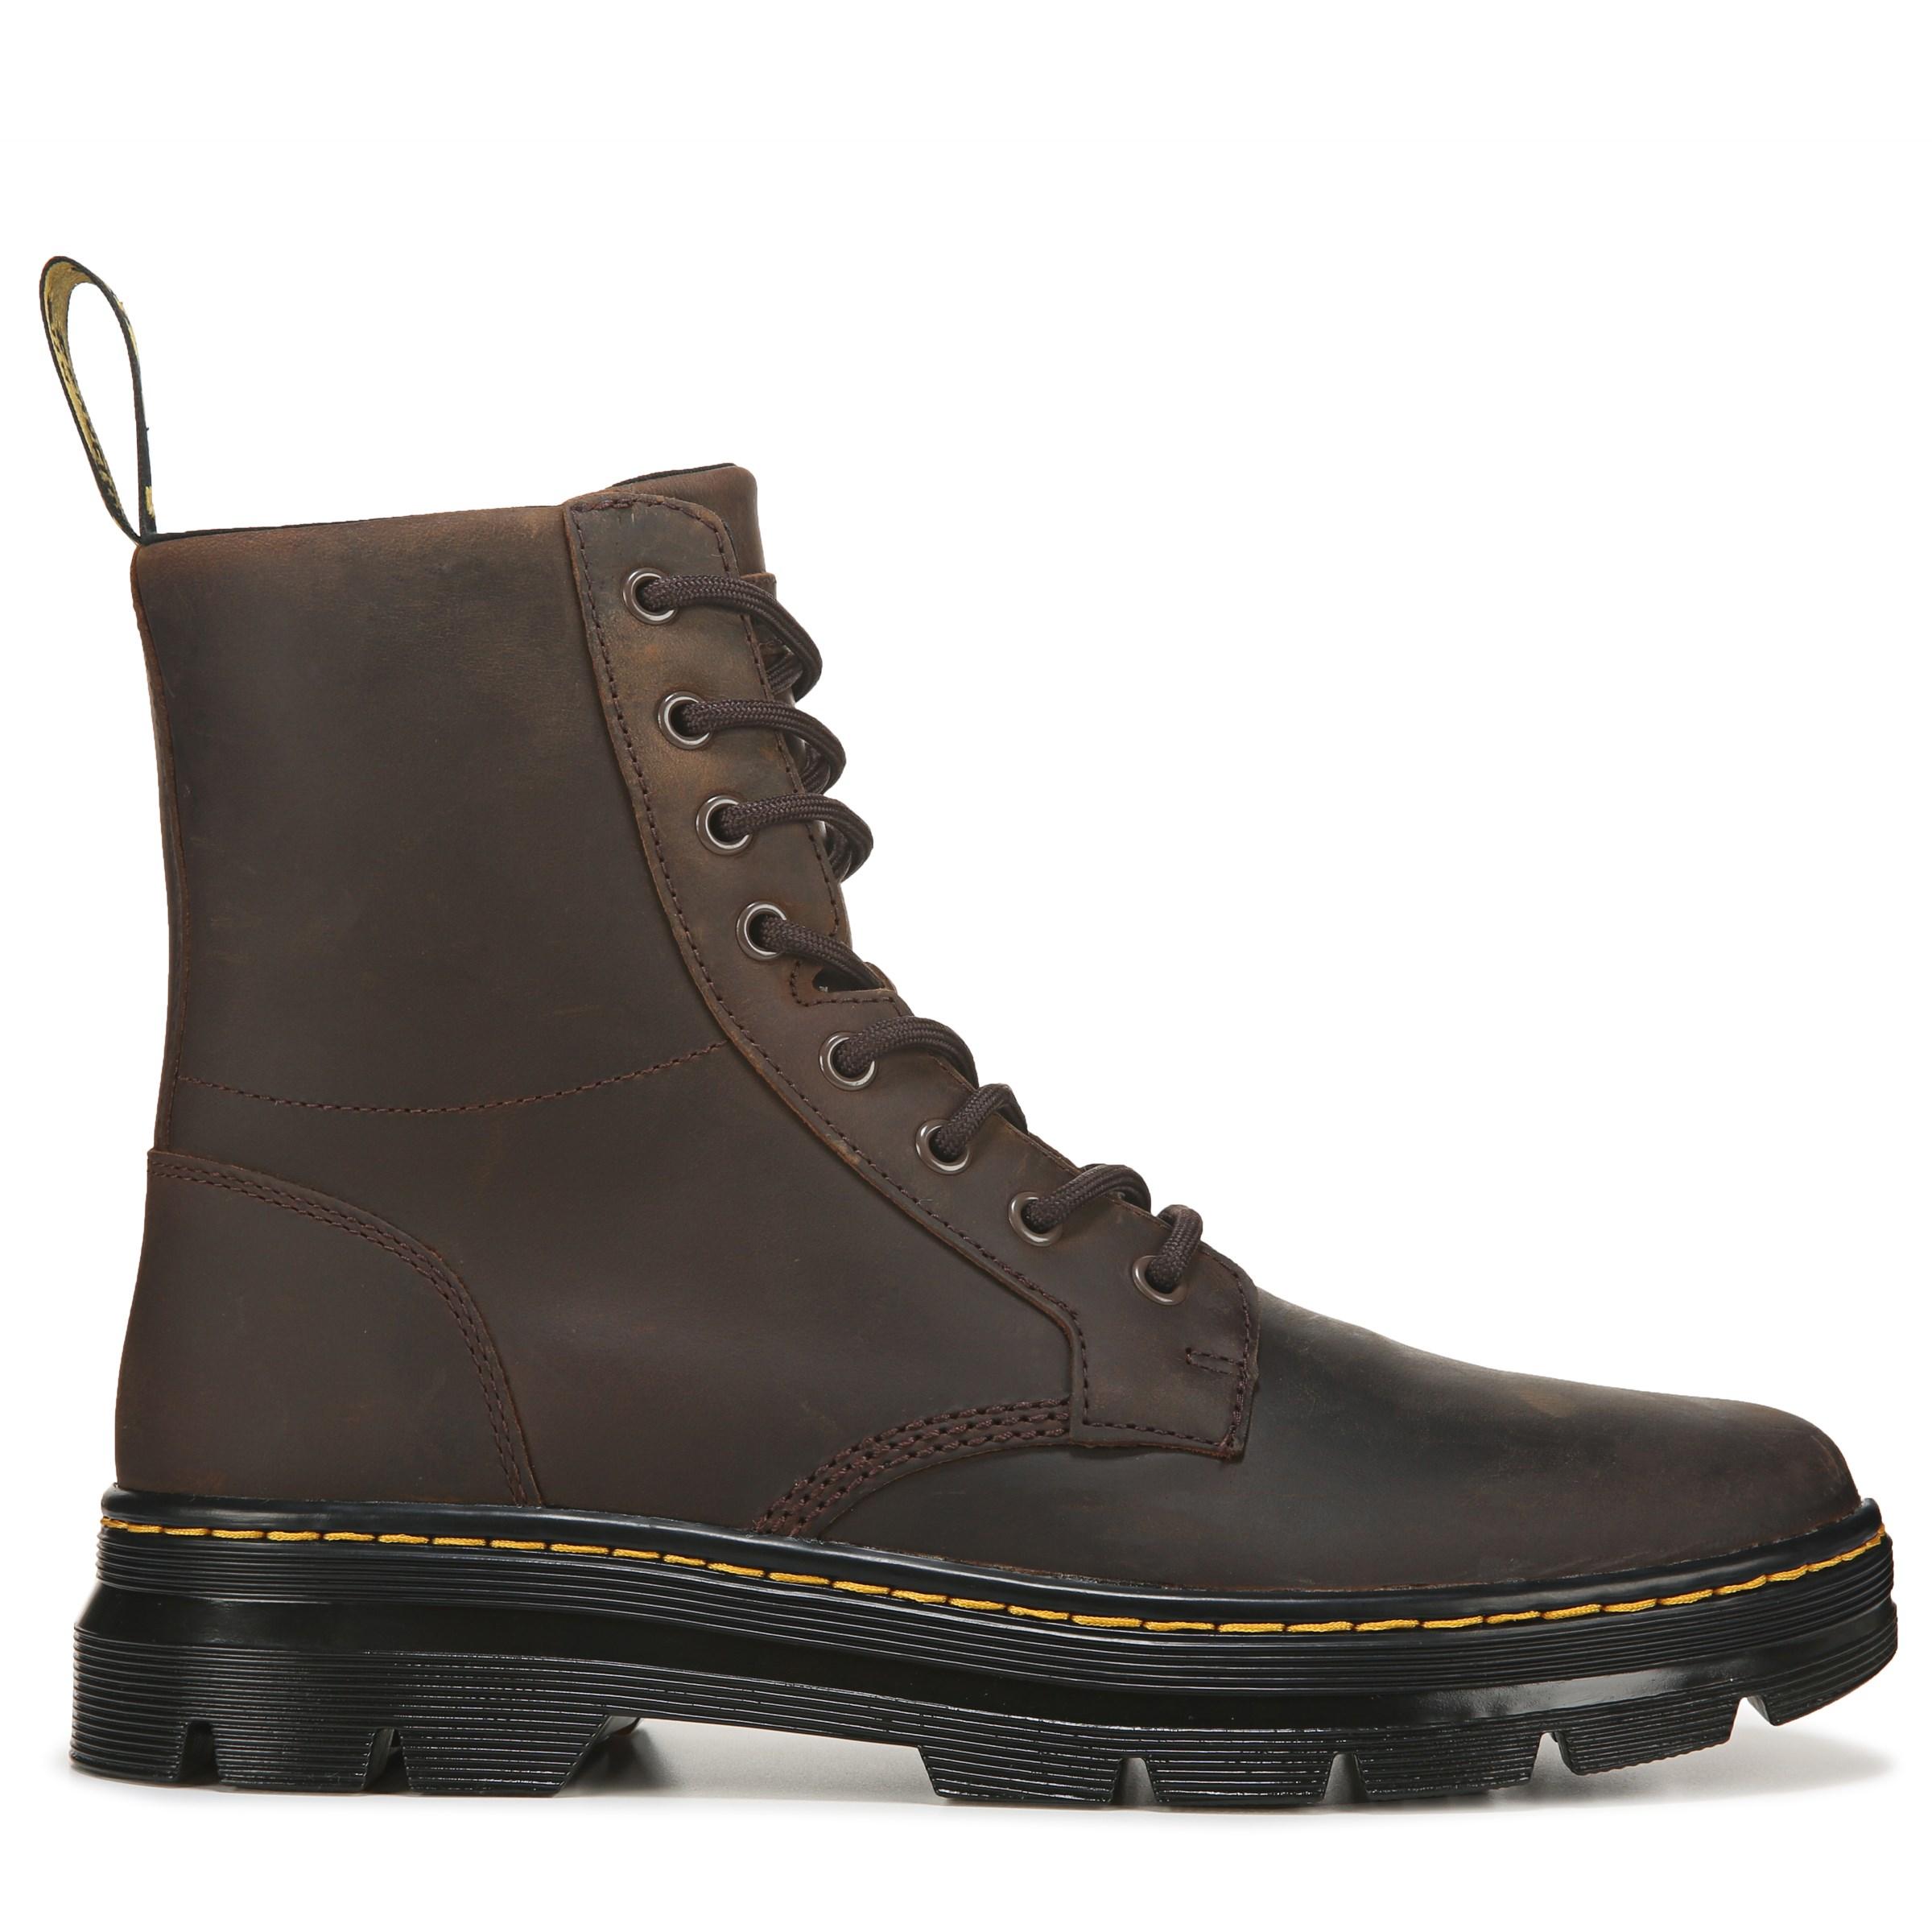 Dr. Martens Leather Combs Combat Boots in Brown for Men - Lyst